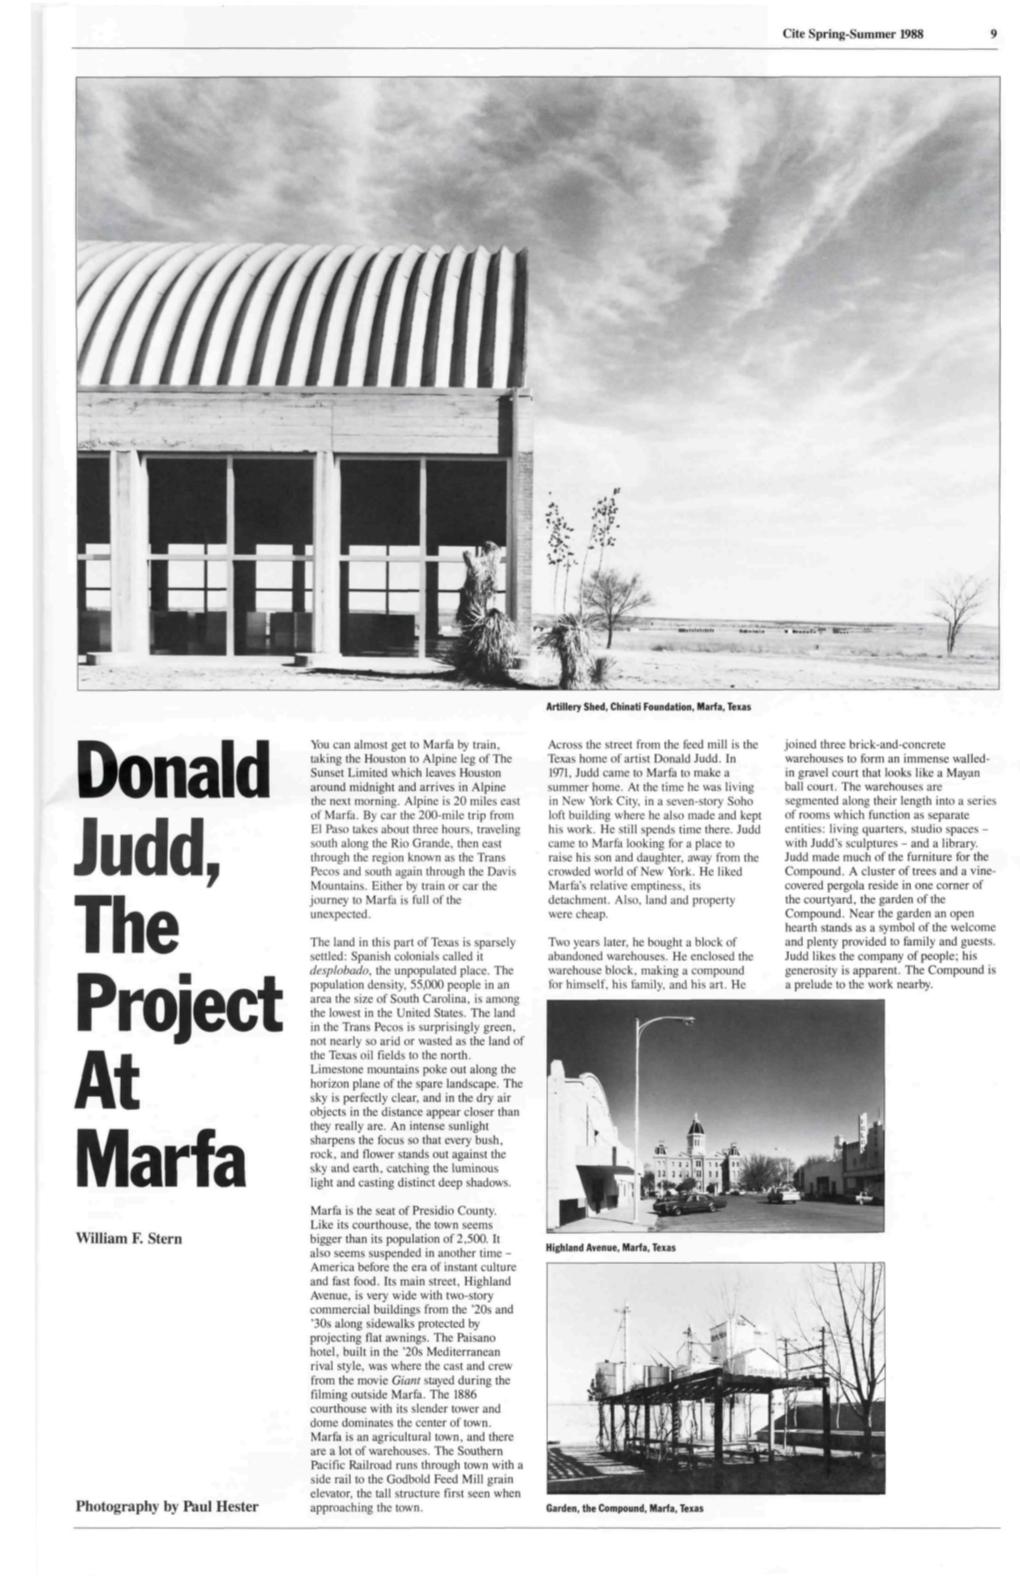 Donald Judd, the Project at Marfa